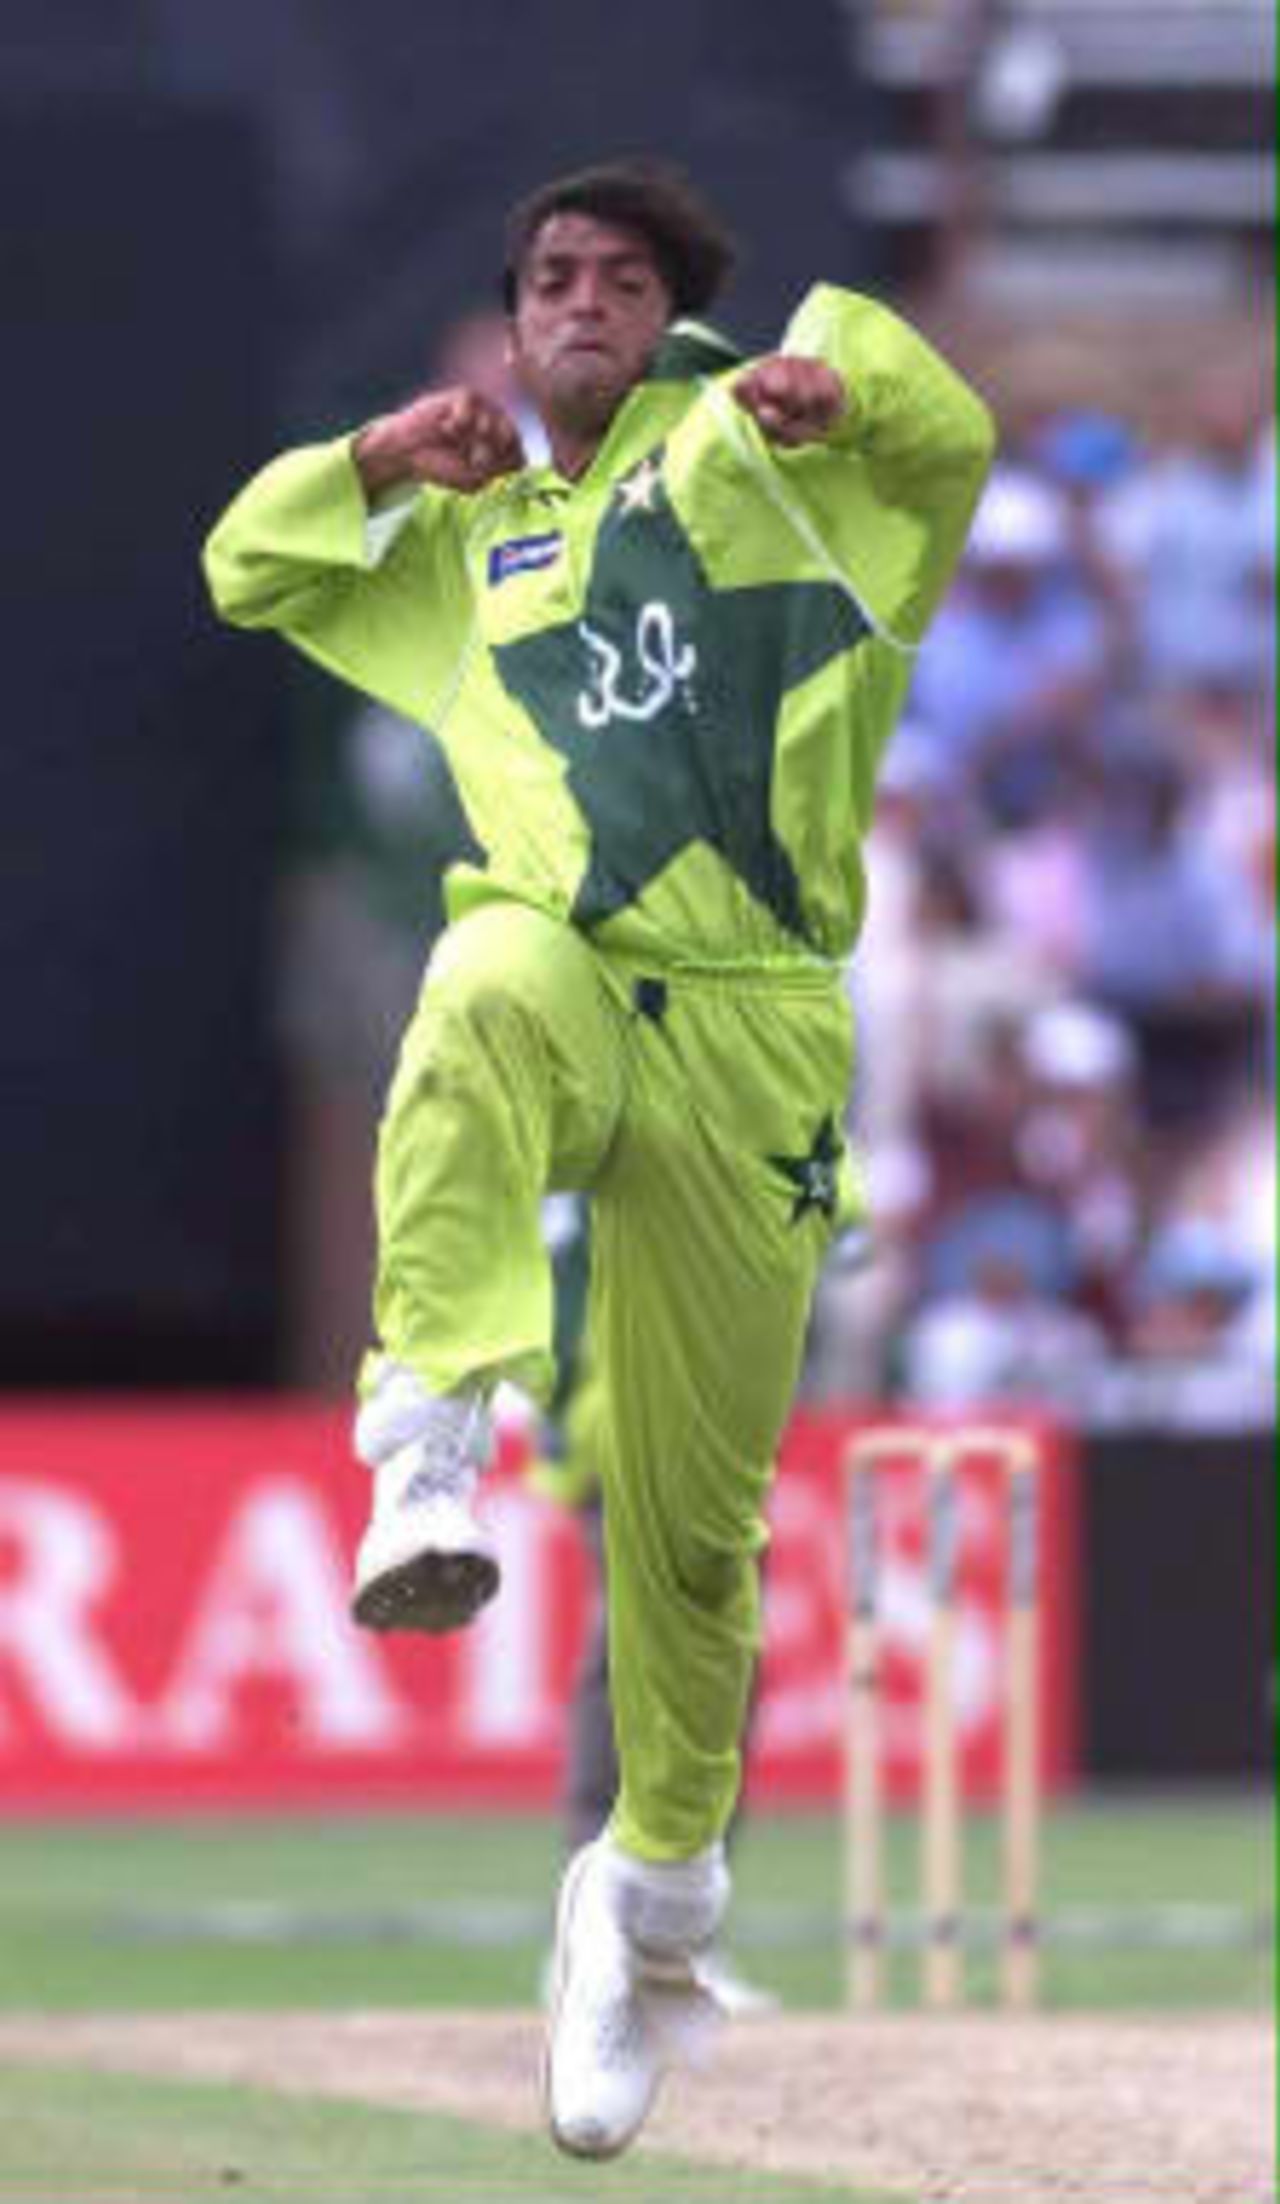 Shoaib Akhtar of Pakistan shows his joy having taken the wicket of Stephen Fleming of New Zealand in their Cricket World Cup Semi-Final at Old Trafford, Manchester, 16 June 1999.